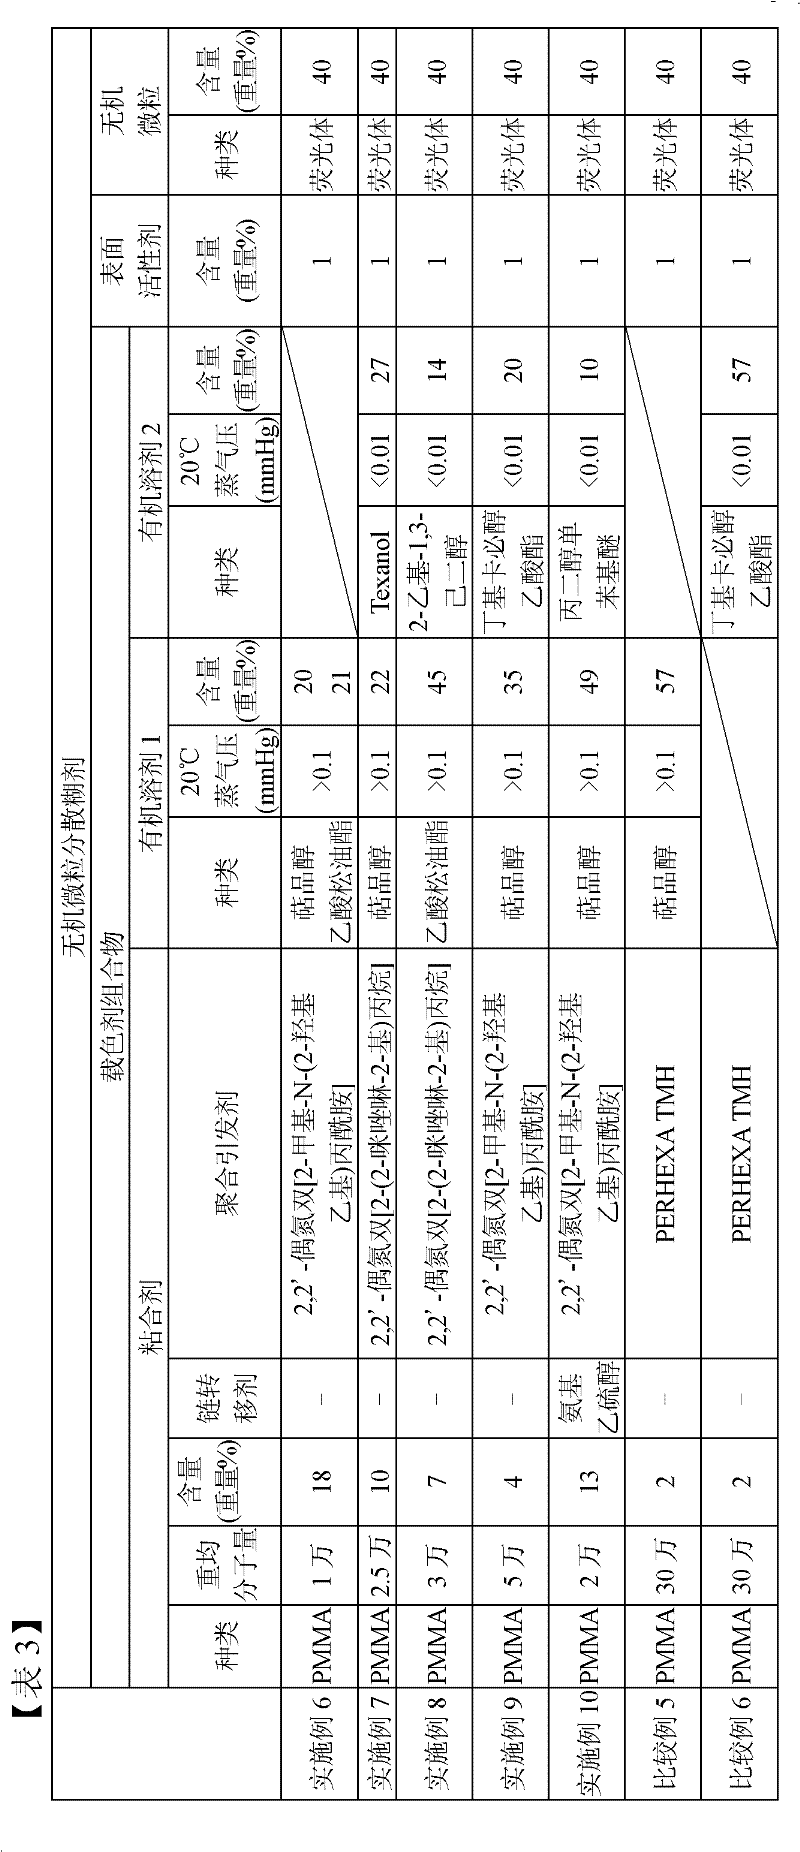 Inorganic microparticle-dispersed paste composition